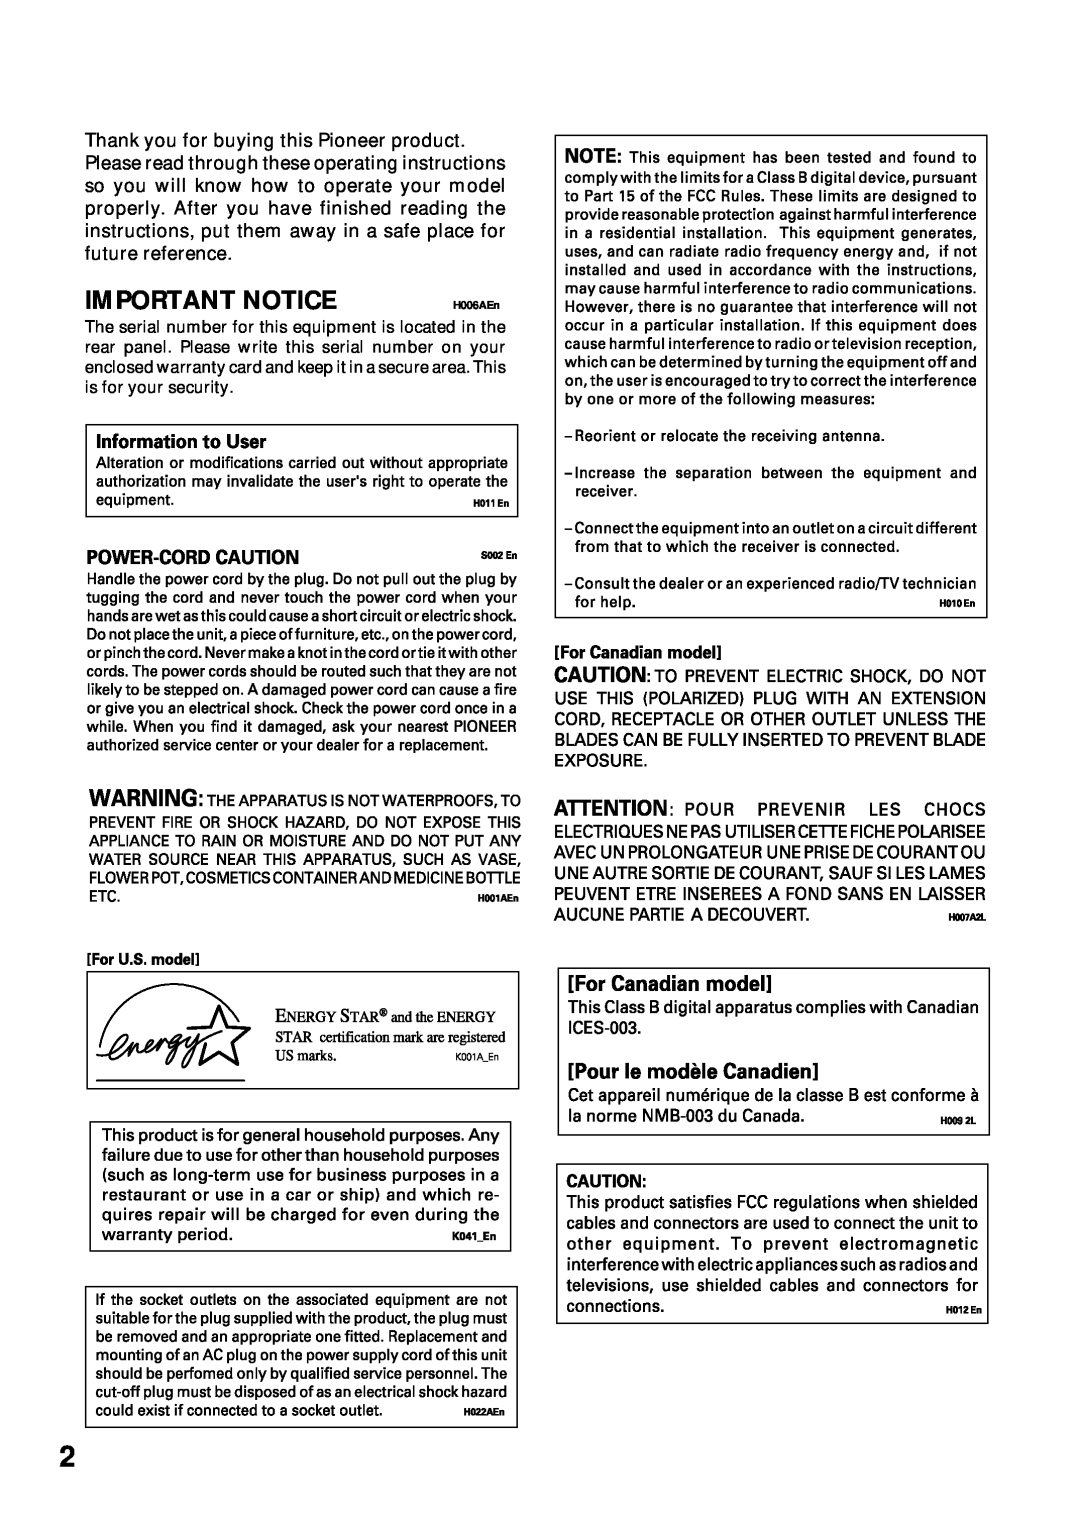 Pioneer VSX-43TX operating instructions Important Notice, H006AEn 